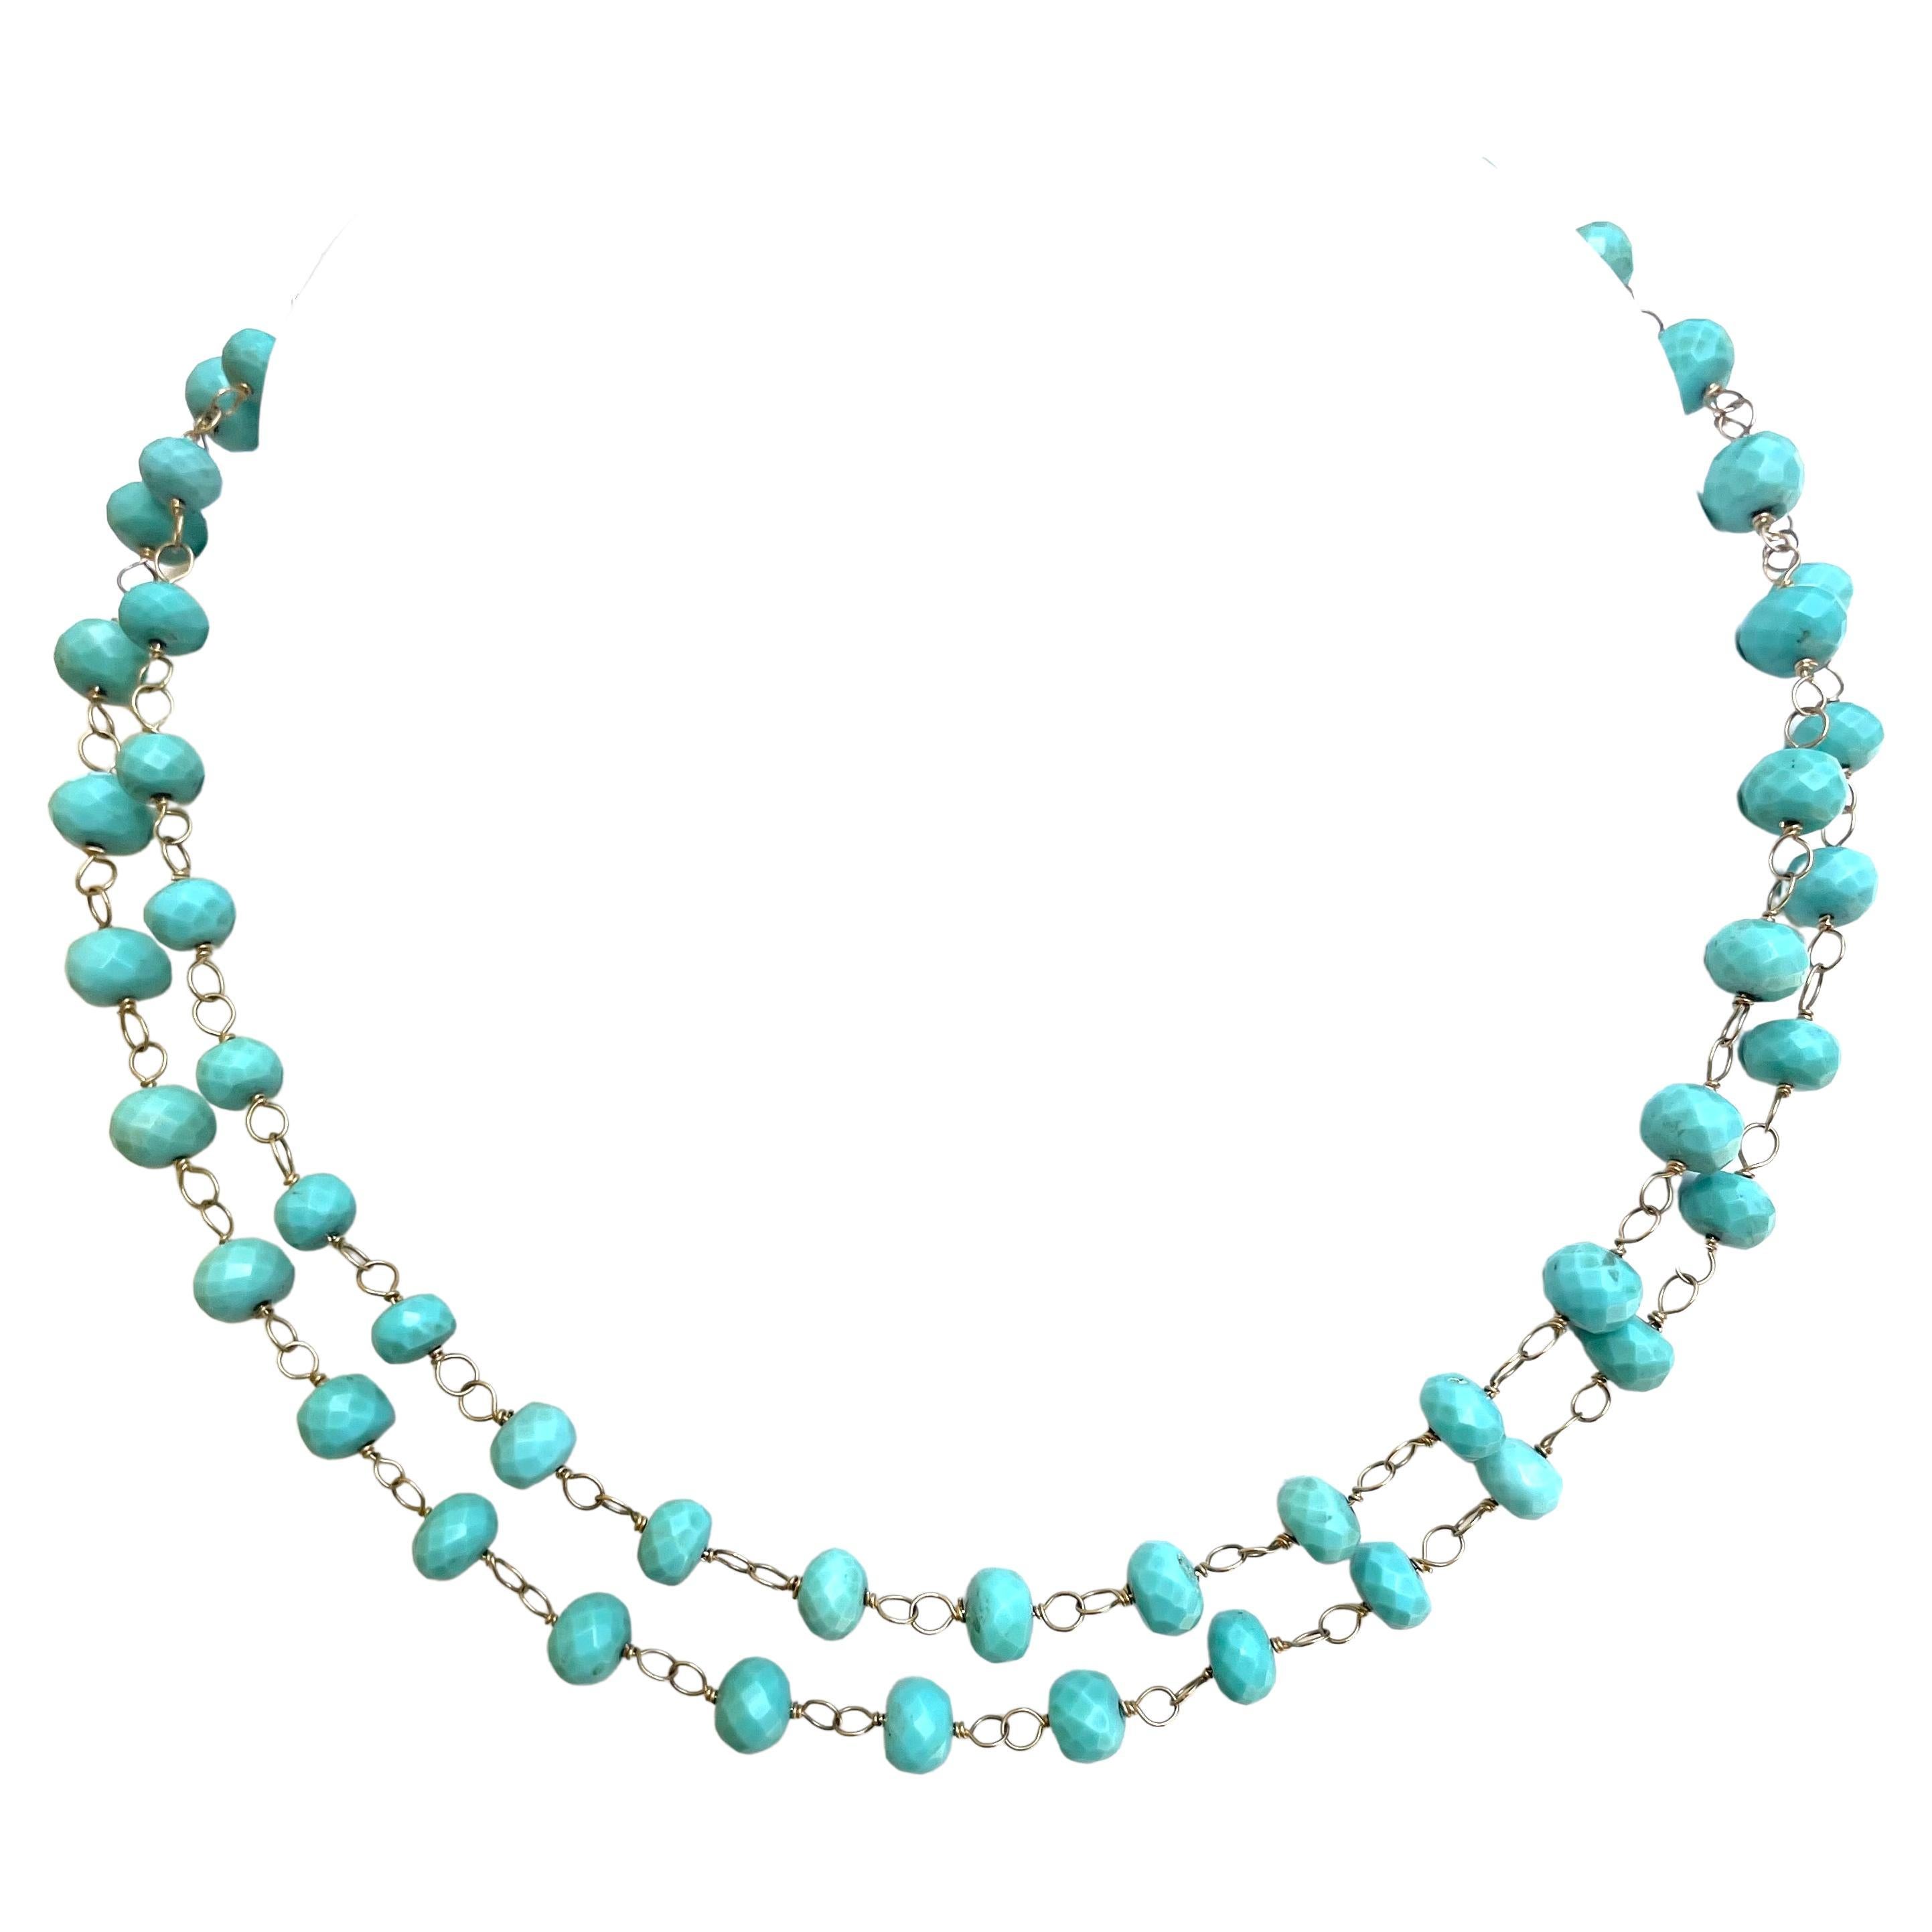 Bead Sleeping Beauty Turquoise Long Paradizia Necklace (shown doubled) For Sale